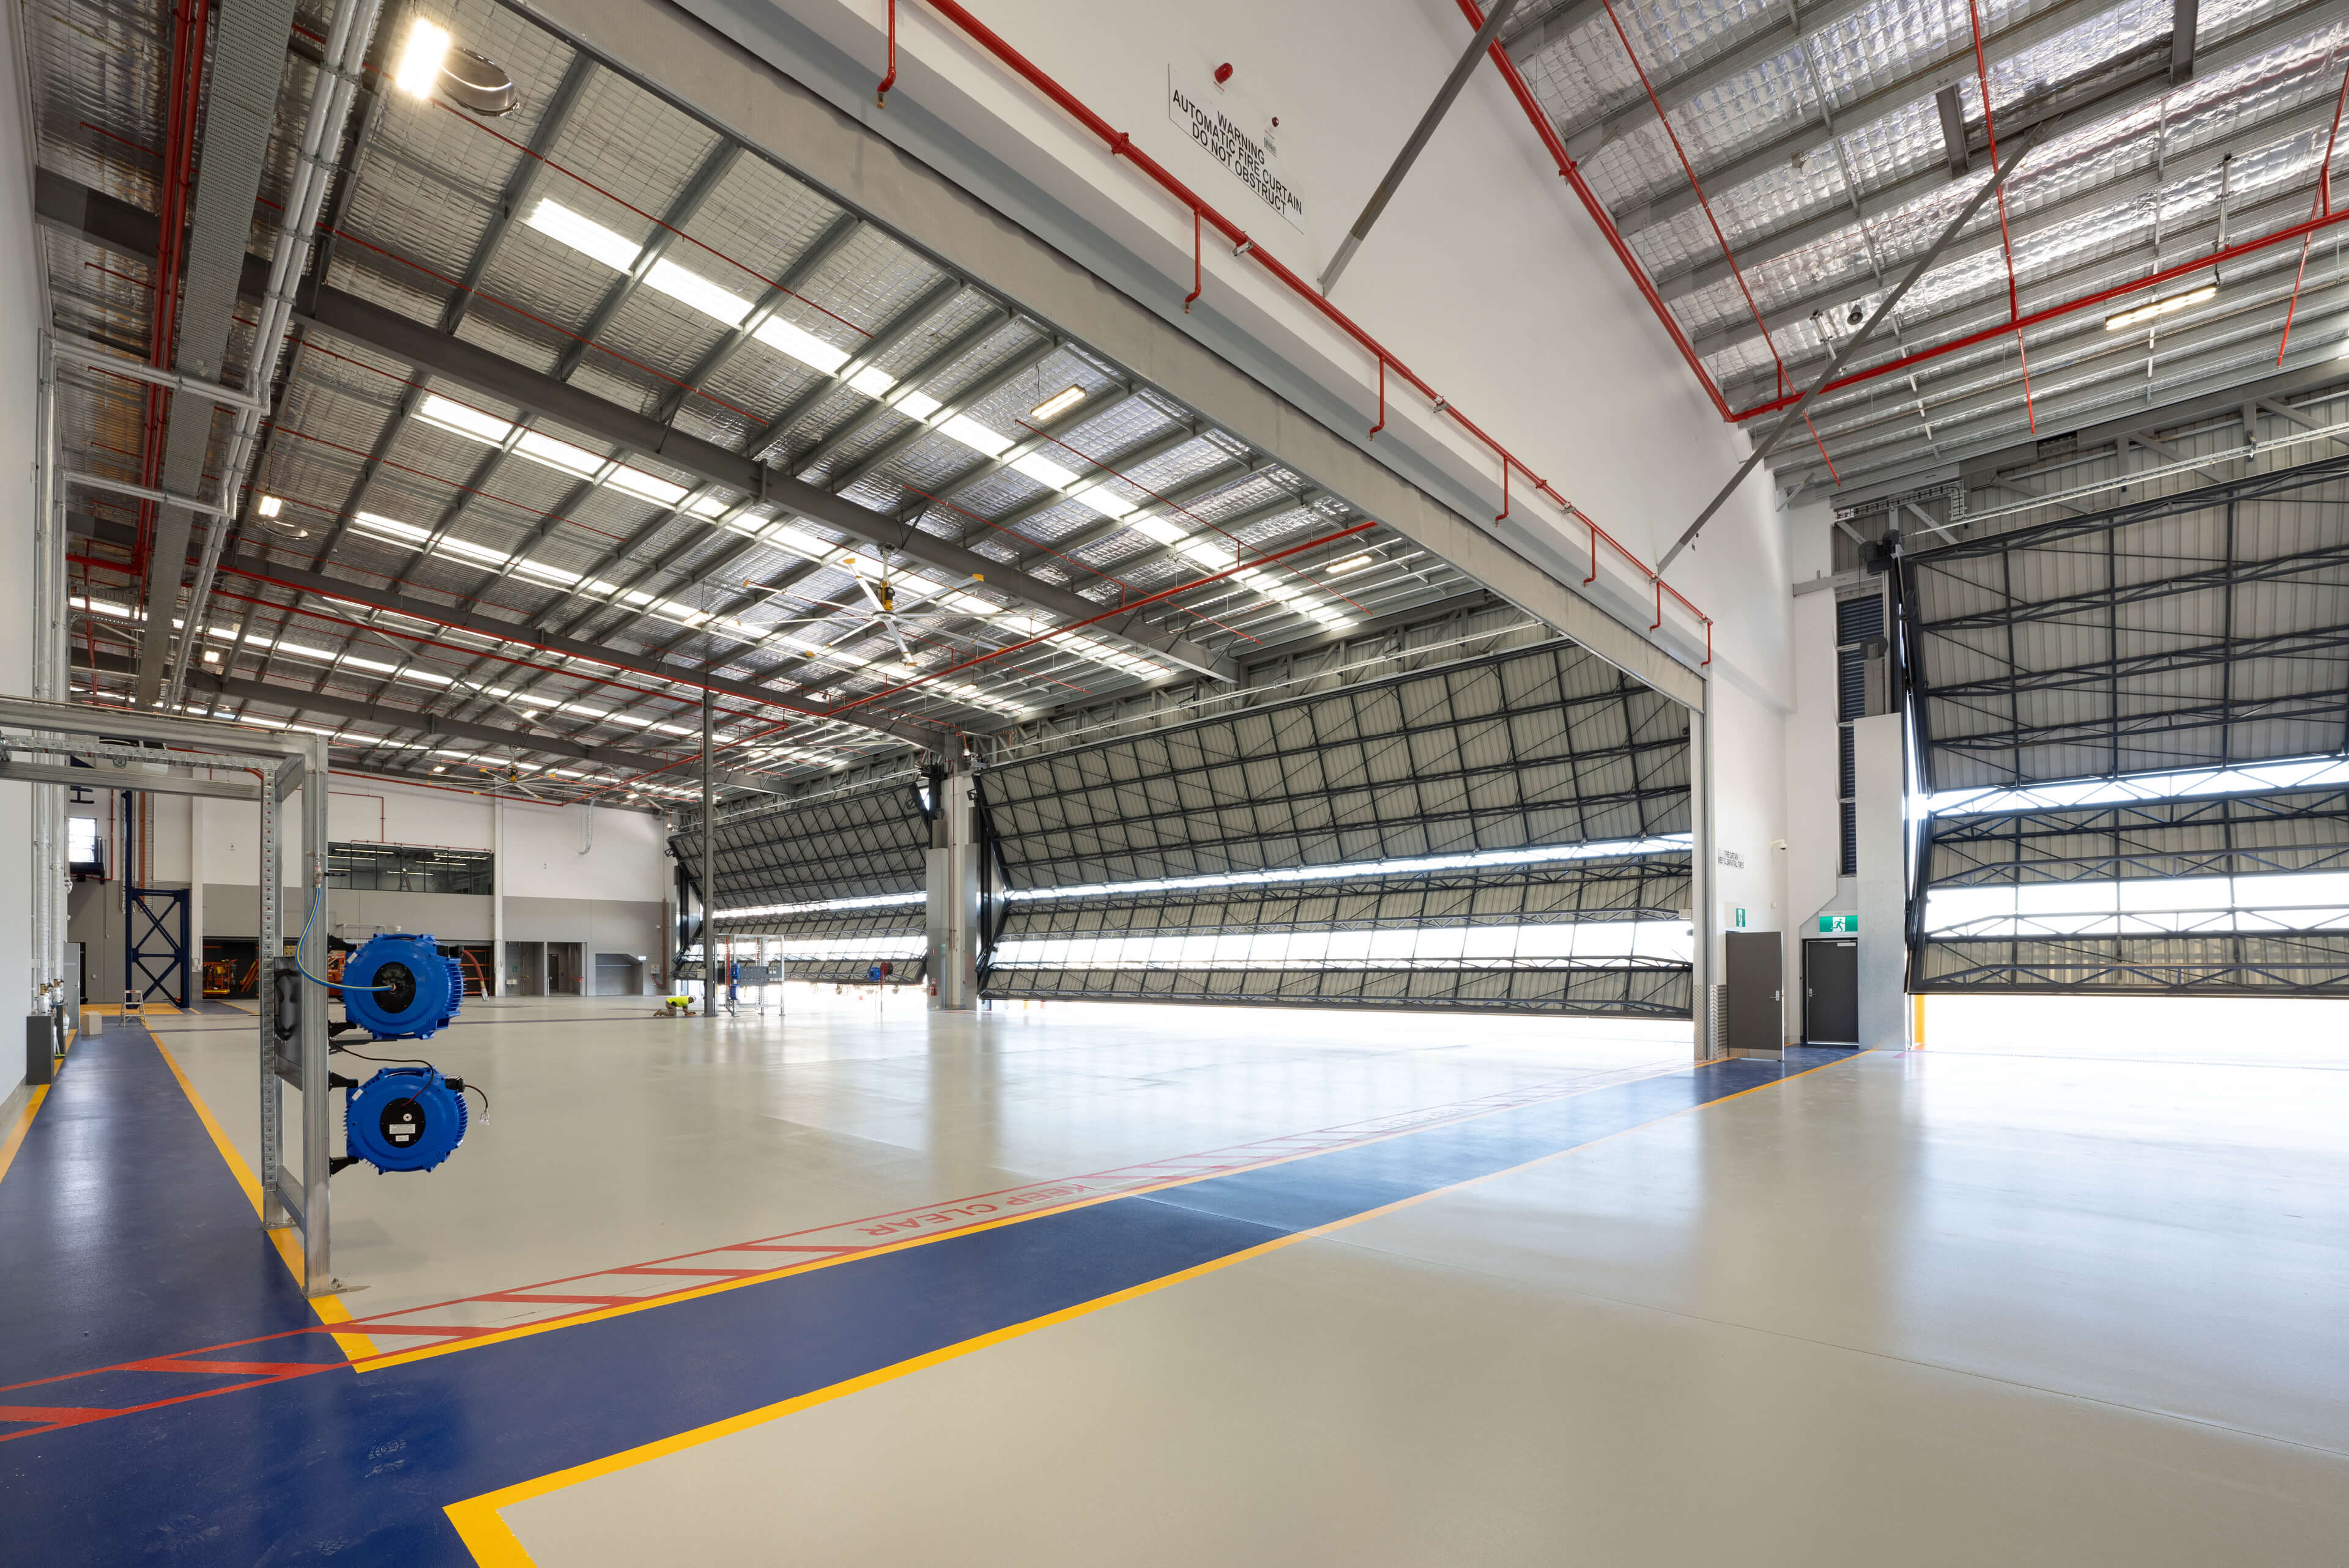 9 interior view of hangar bays with blue floor markings for fixed wing operation at polair facility bankstown taylor construction refurbishment and live environments